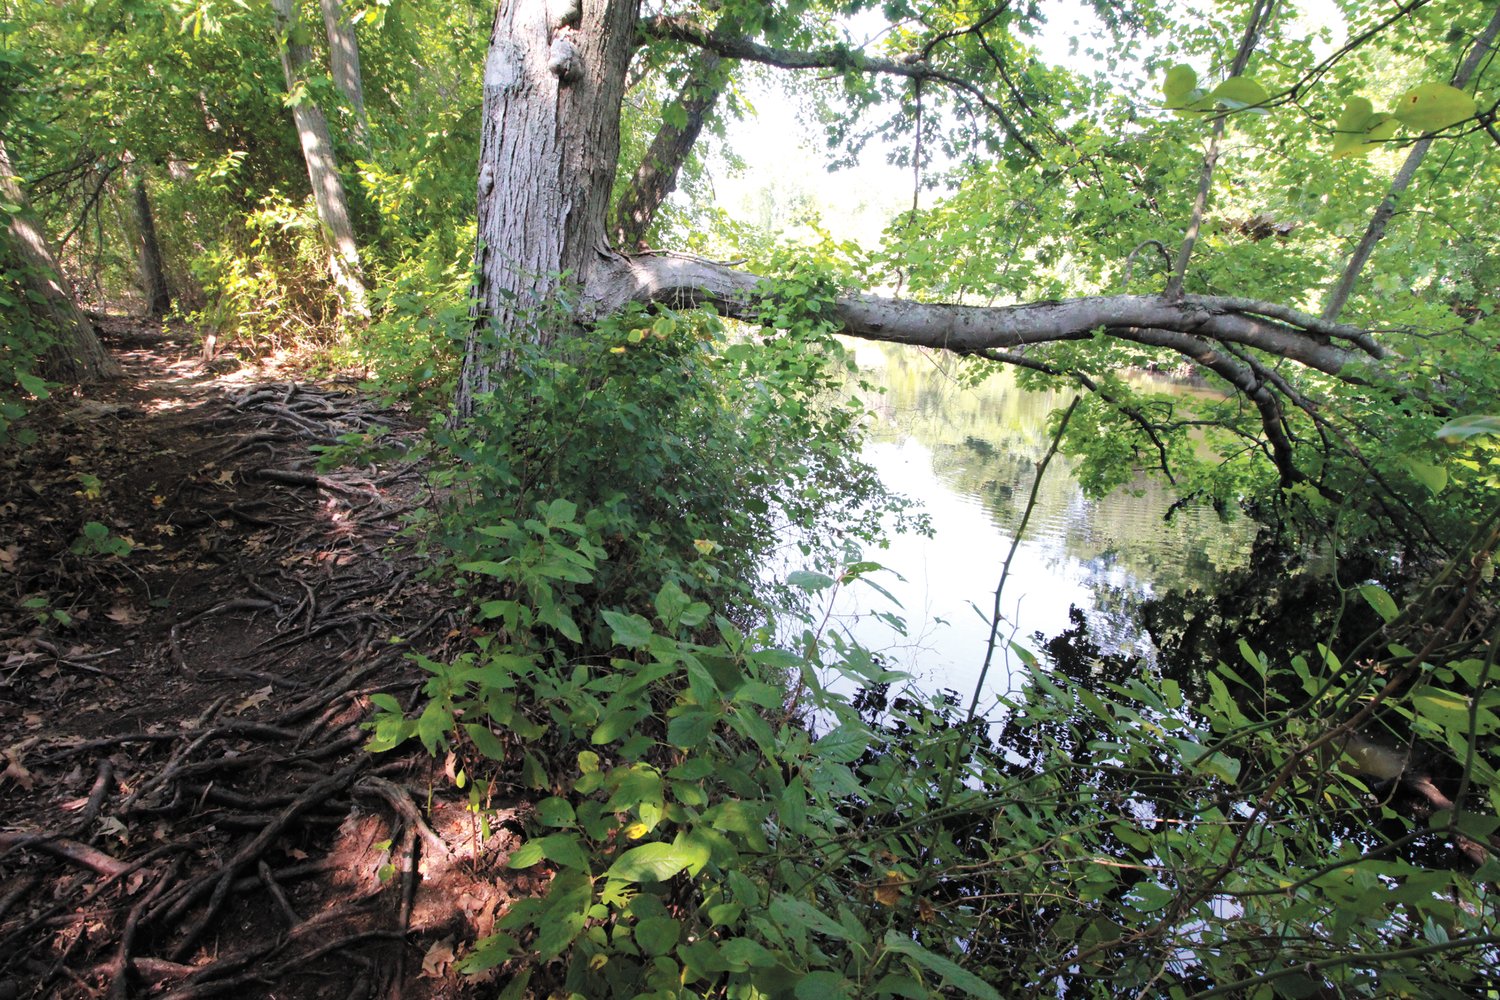 RIVER REFLECTIONS: The river trail on the south bank of the Pawtuxet offers a shaded walk with glimpses of the river and the ability to connect to the north bank trail at the Warwick Avenue Bridge. (Warwick Beacon photo)